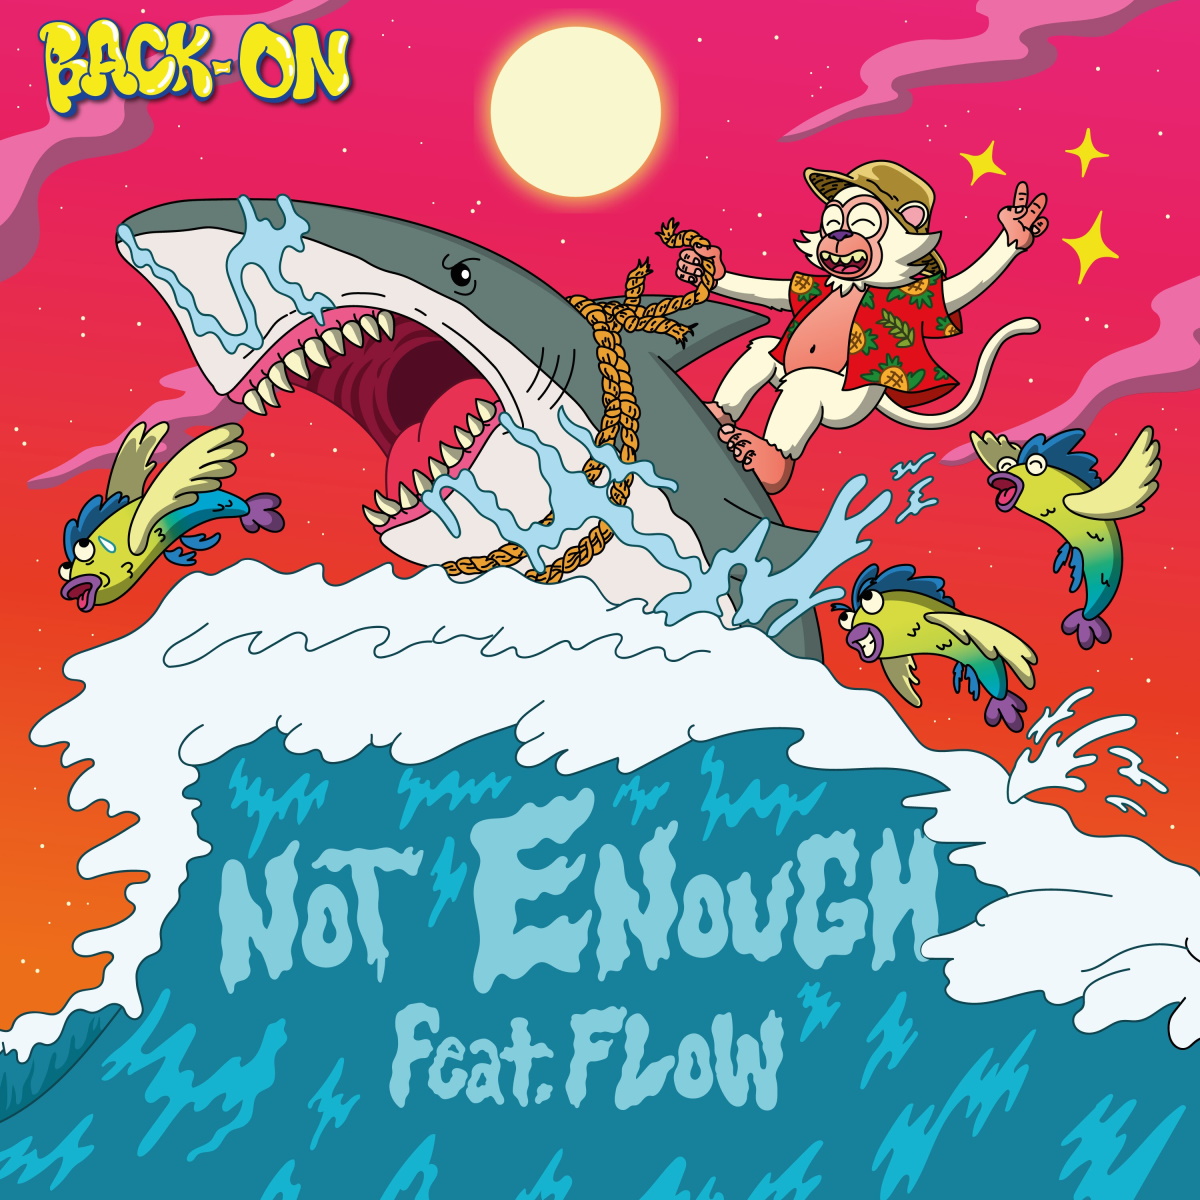 『BACK-ON - NOT ENOUGH feat. FLOW』収録の『NOT ENOUGH feat. FLOW』ジャケット